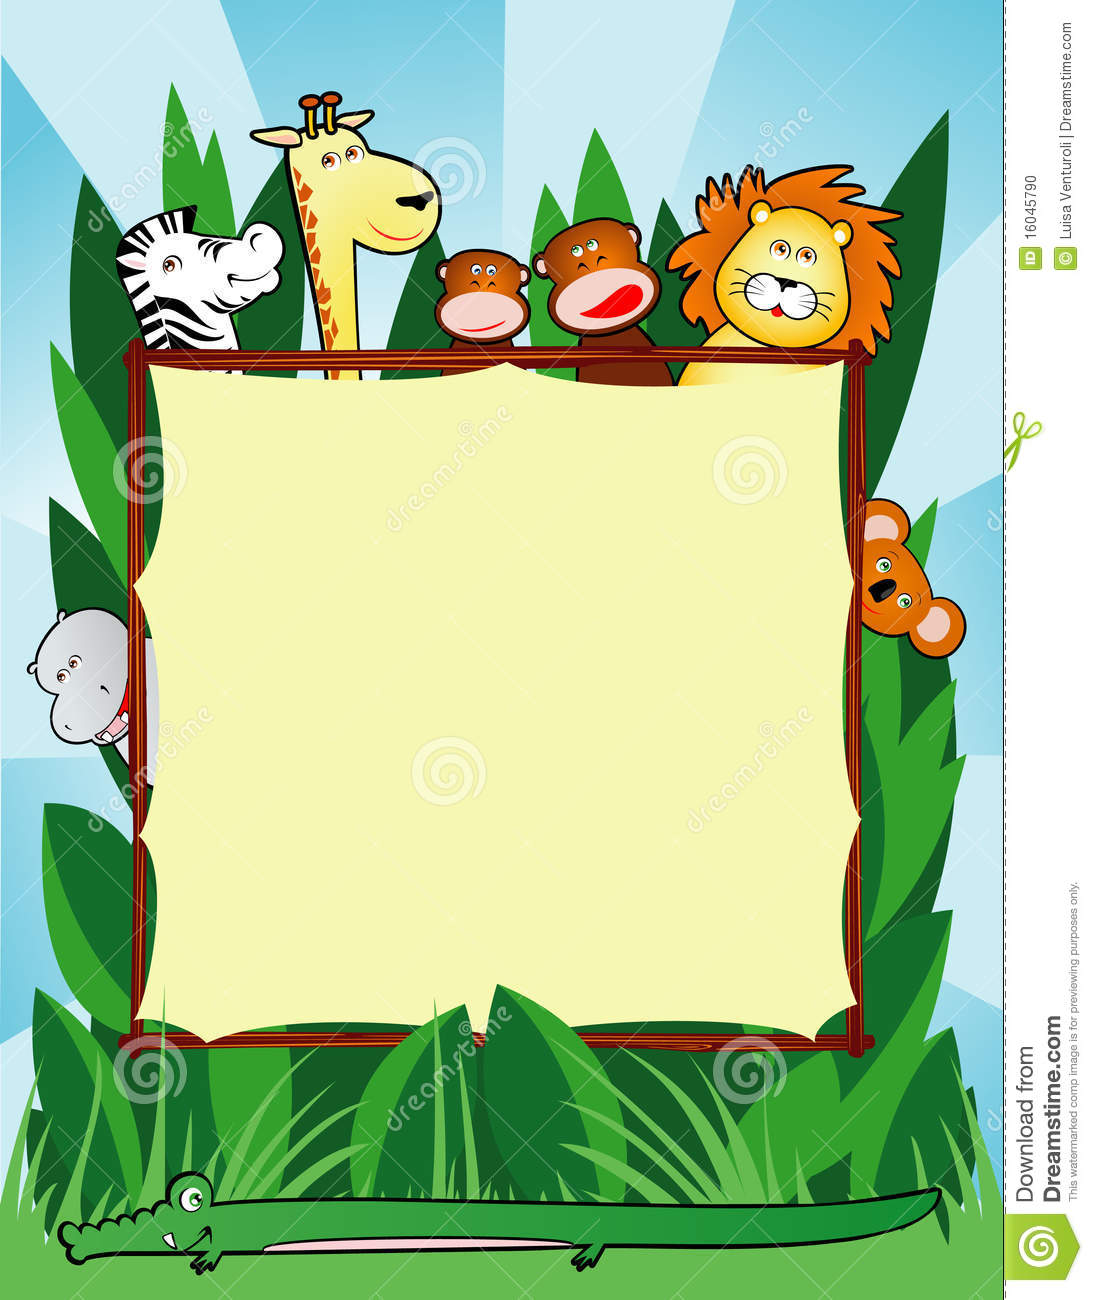 Jungle Animal Clipart Images | Free download on ClipArtMag